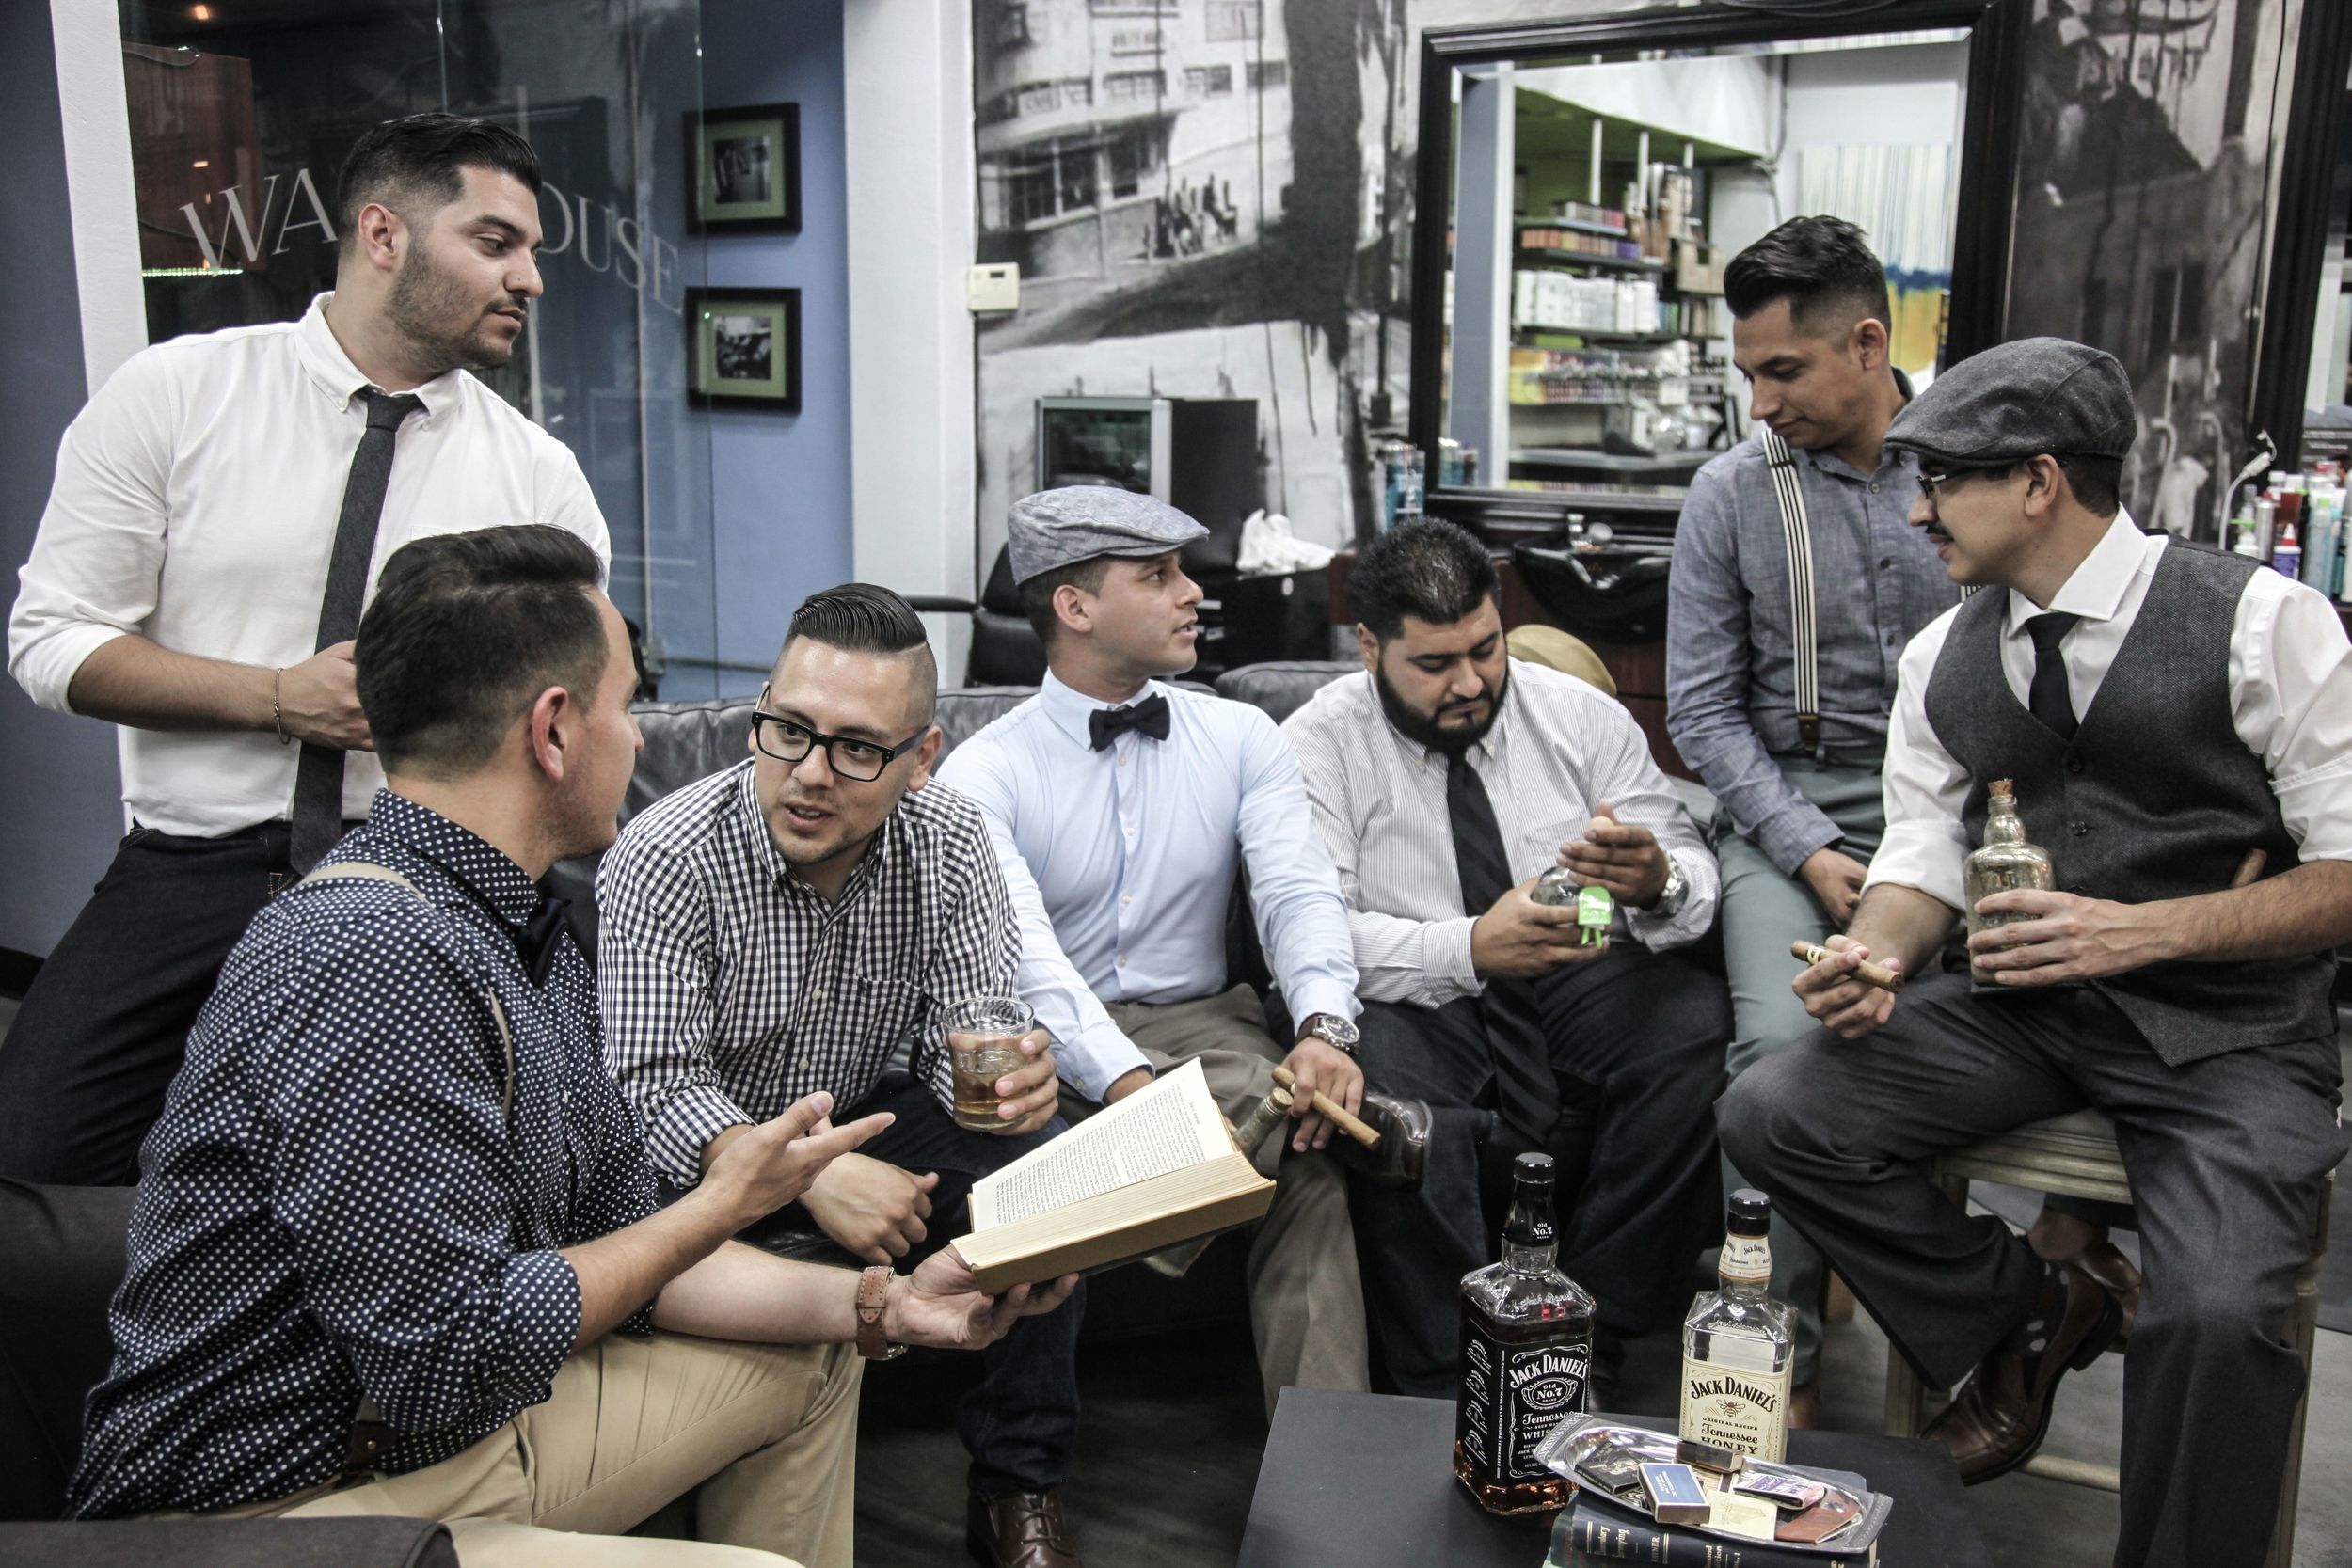 group of men having a discussion while drinking